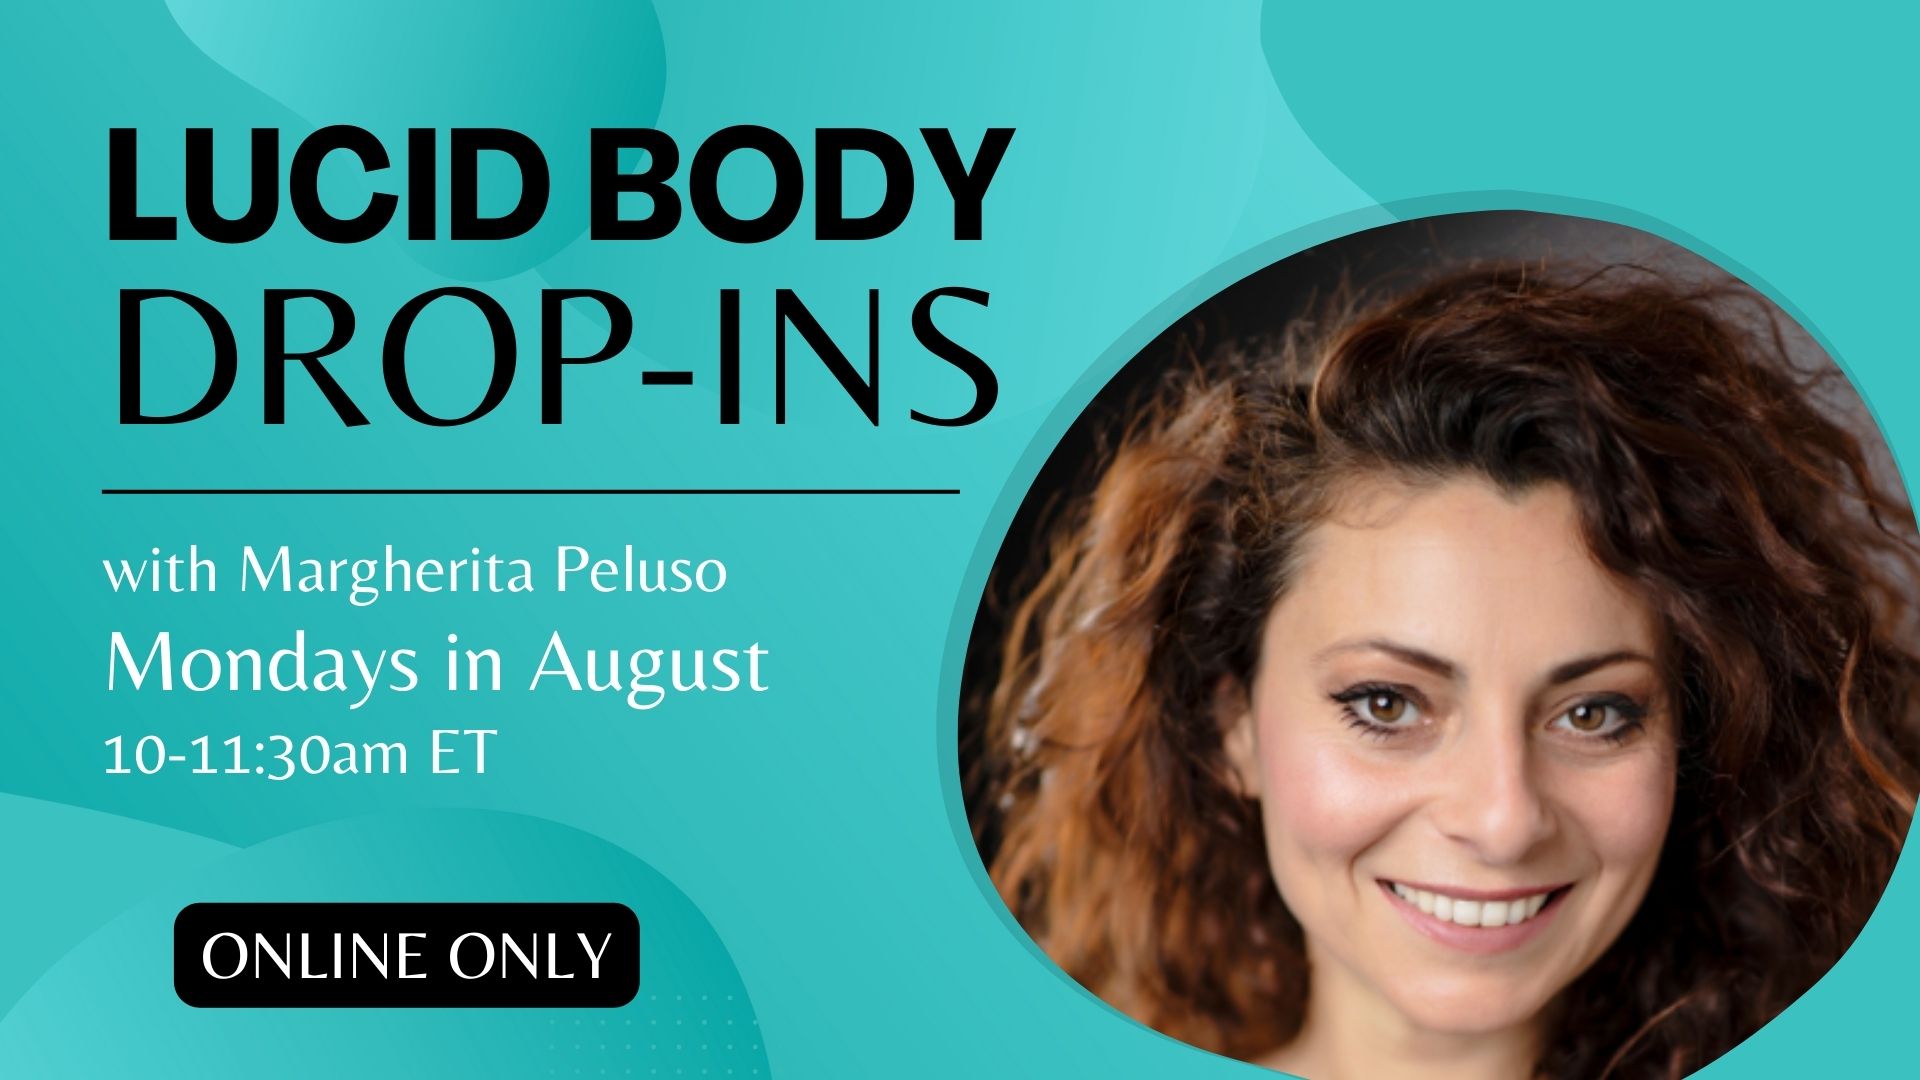 Lucid Body Drop-ins Monday in August with Margherita Peluso 10-11:30am ET